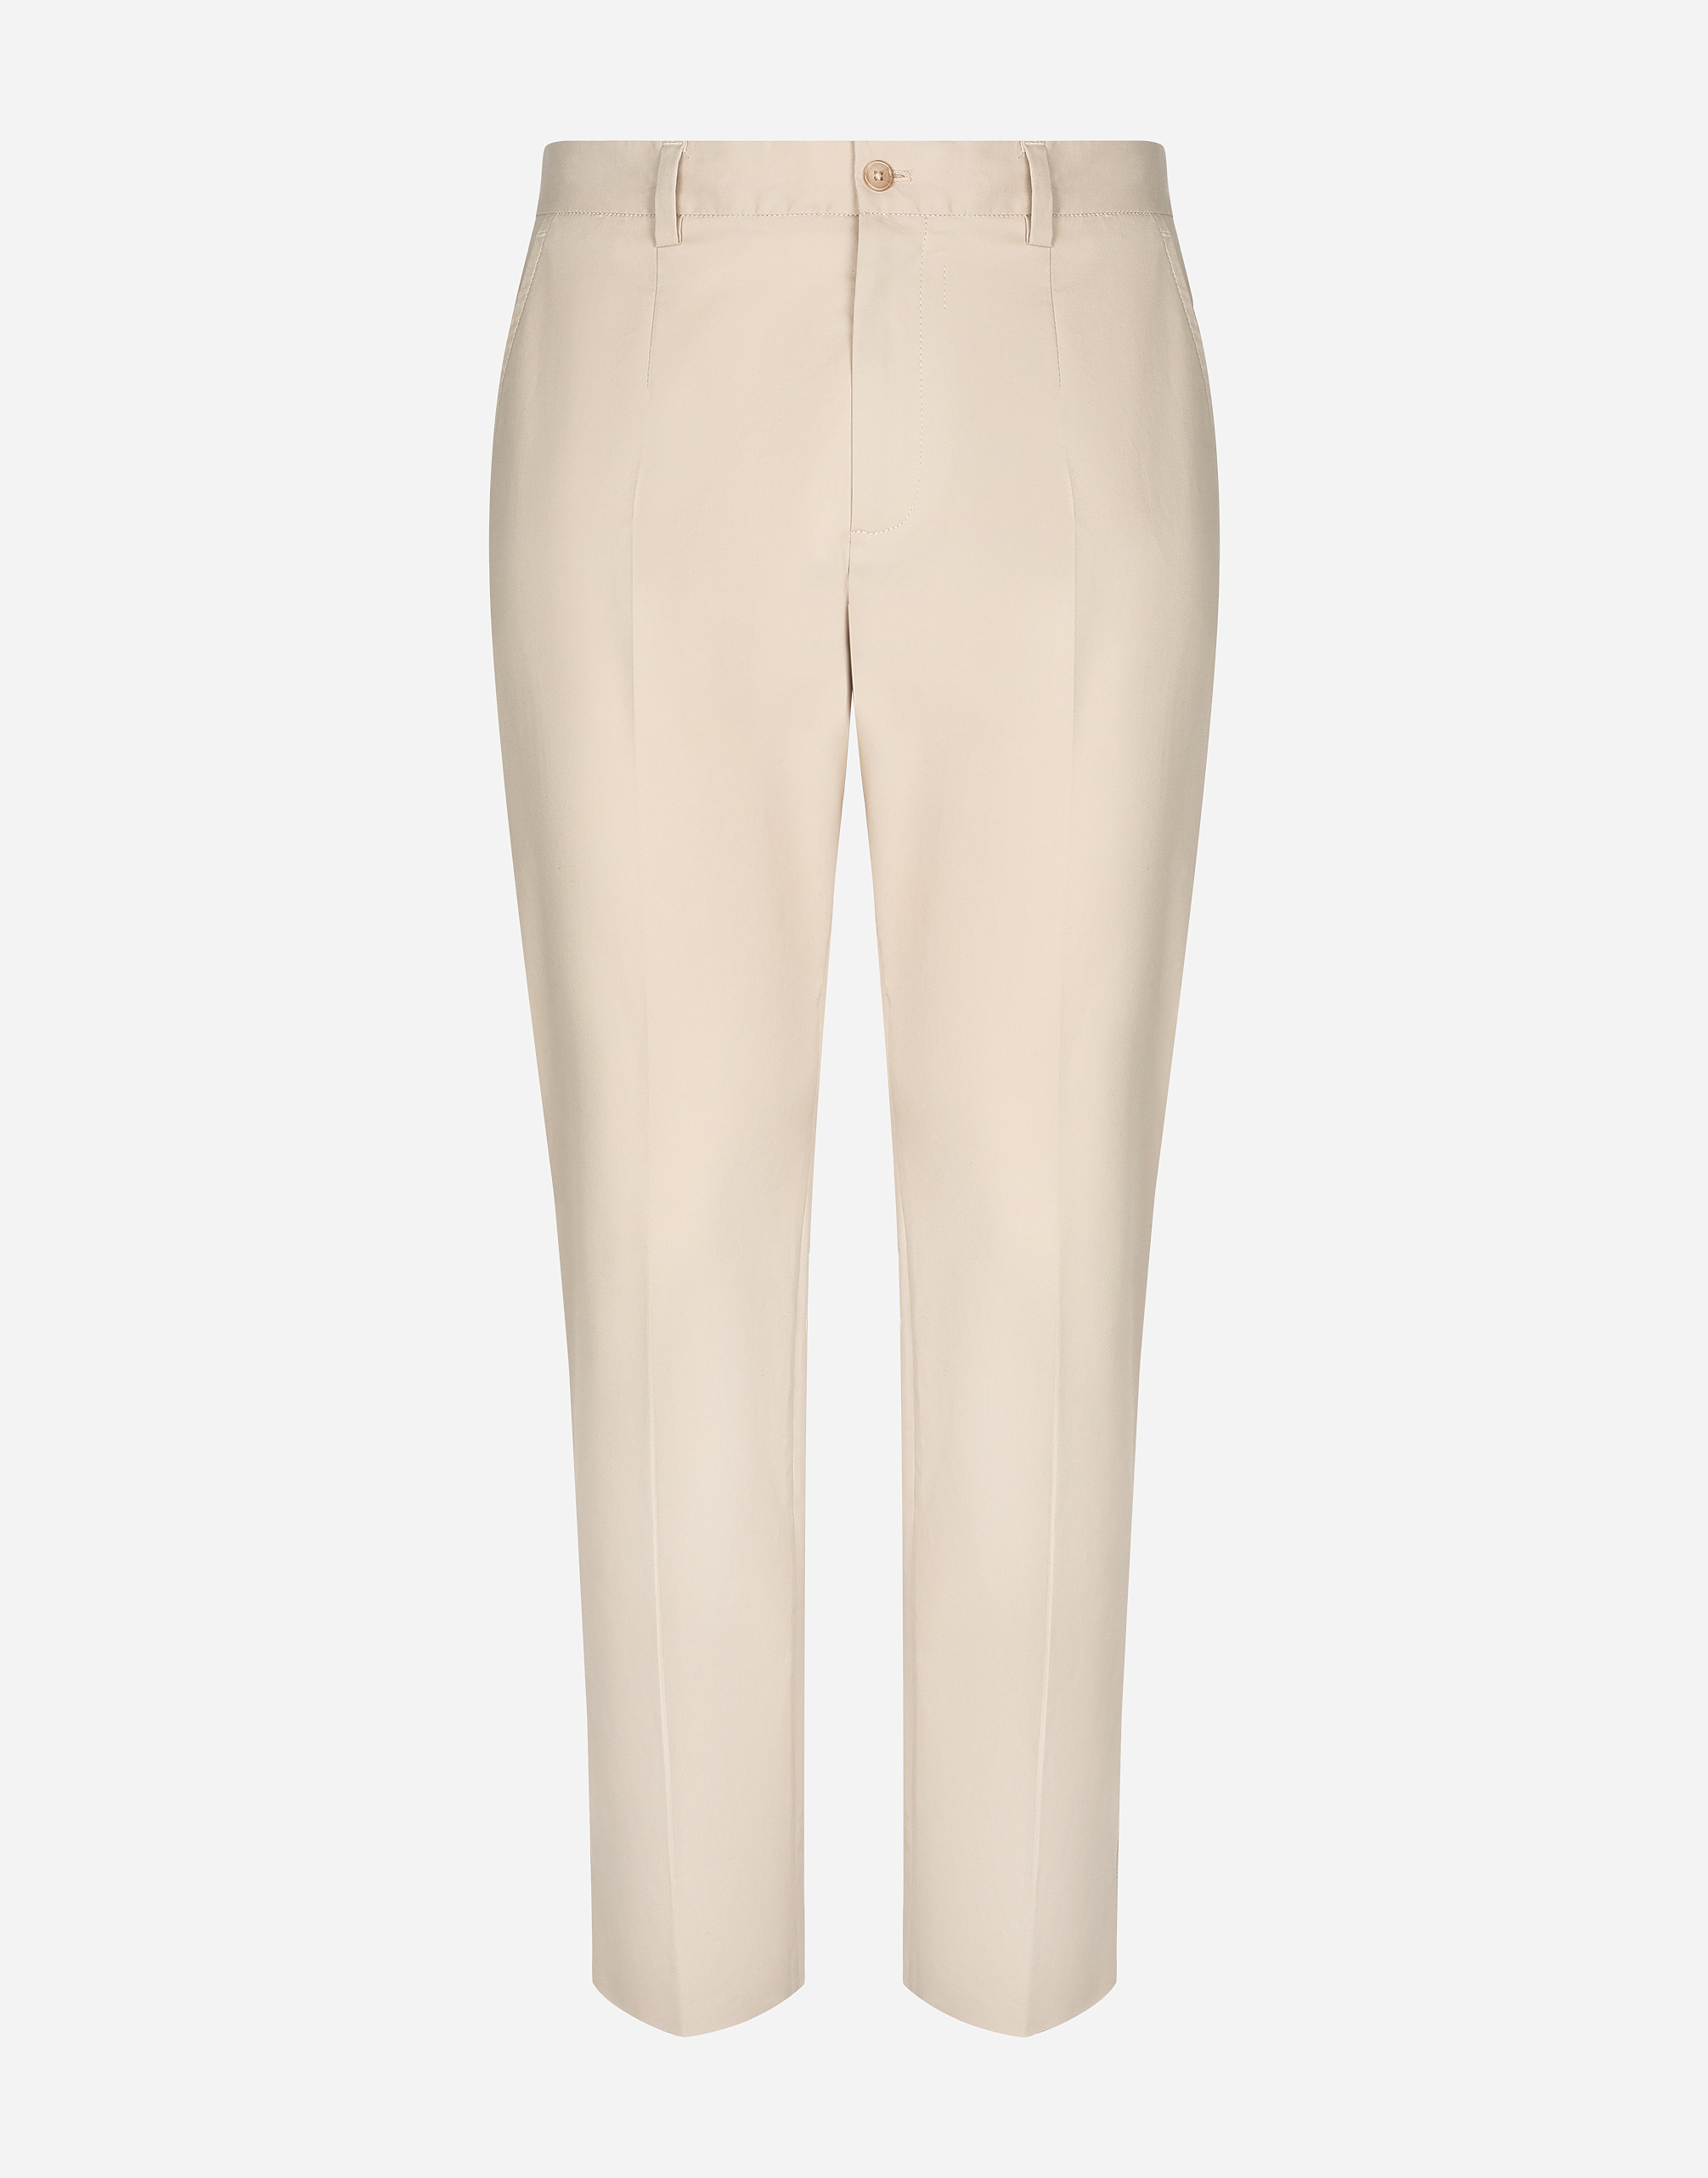 Dolce & Gabbana Stretch Cotton Trousers With Branded Tag In Beige